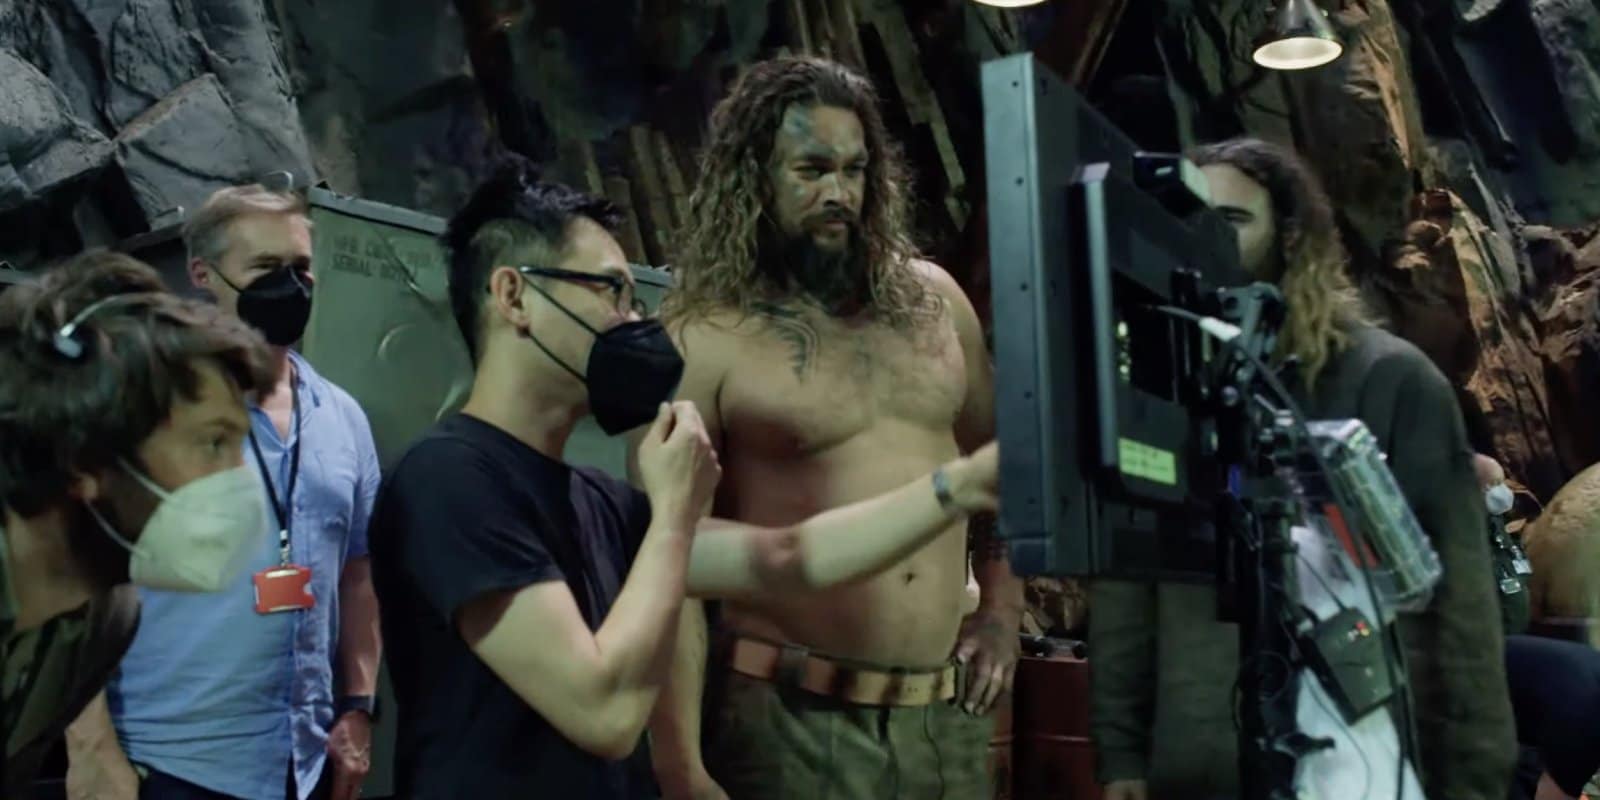 Aquaman And The Lost Kingdom Behind The Scenes Shows Jason Momoa, Amber Heard In Action